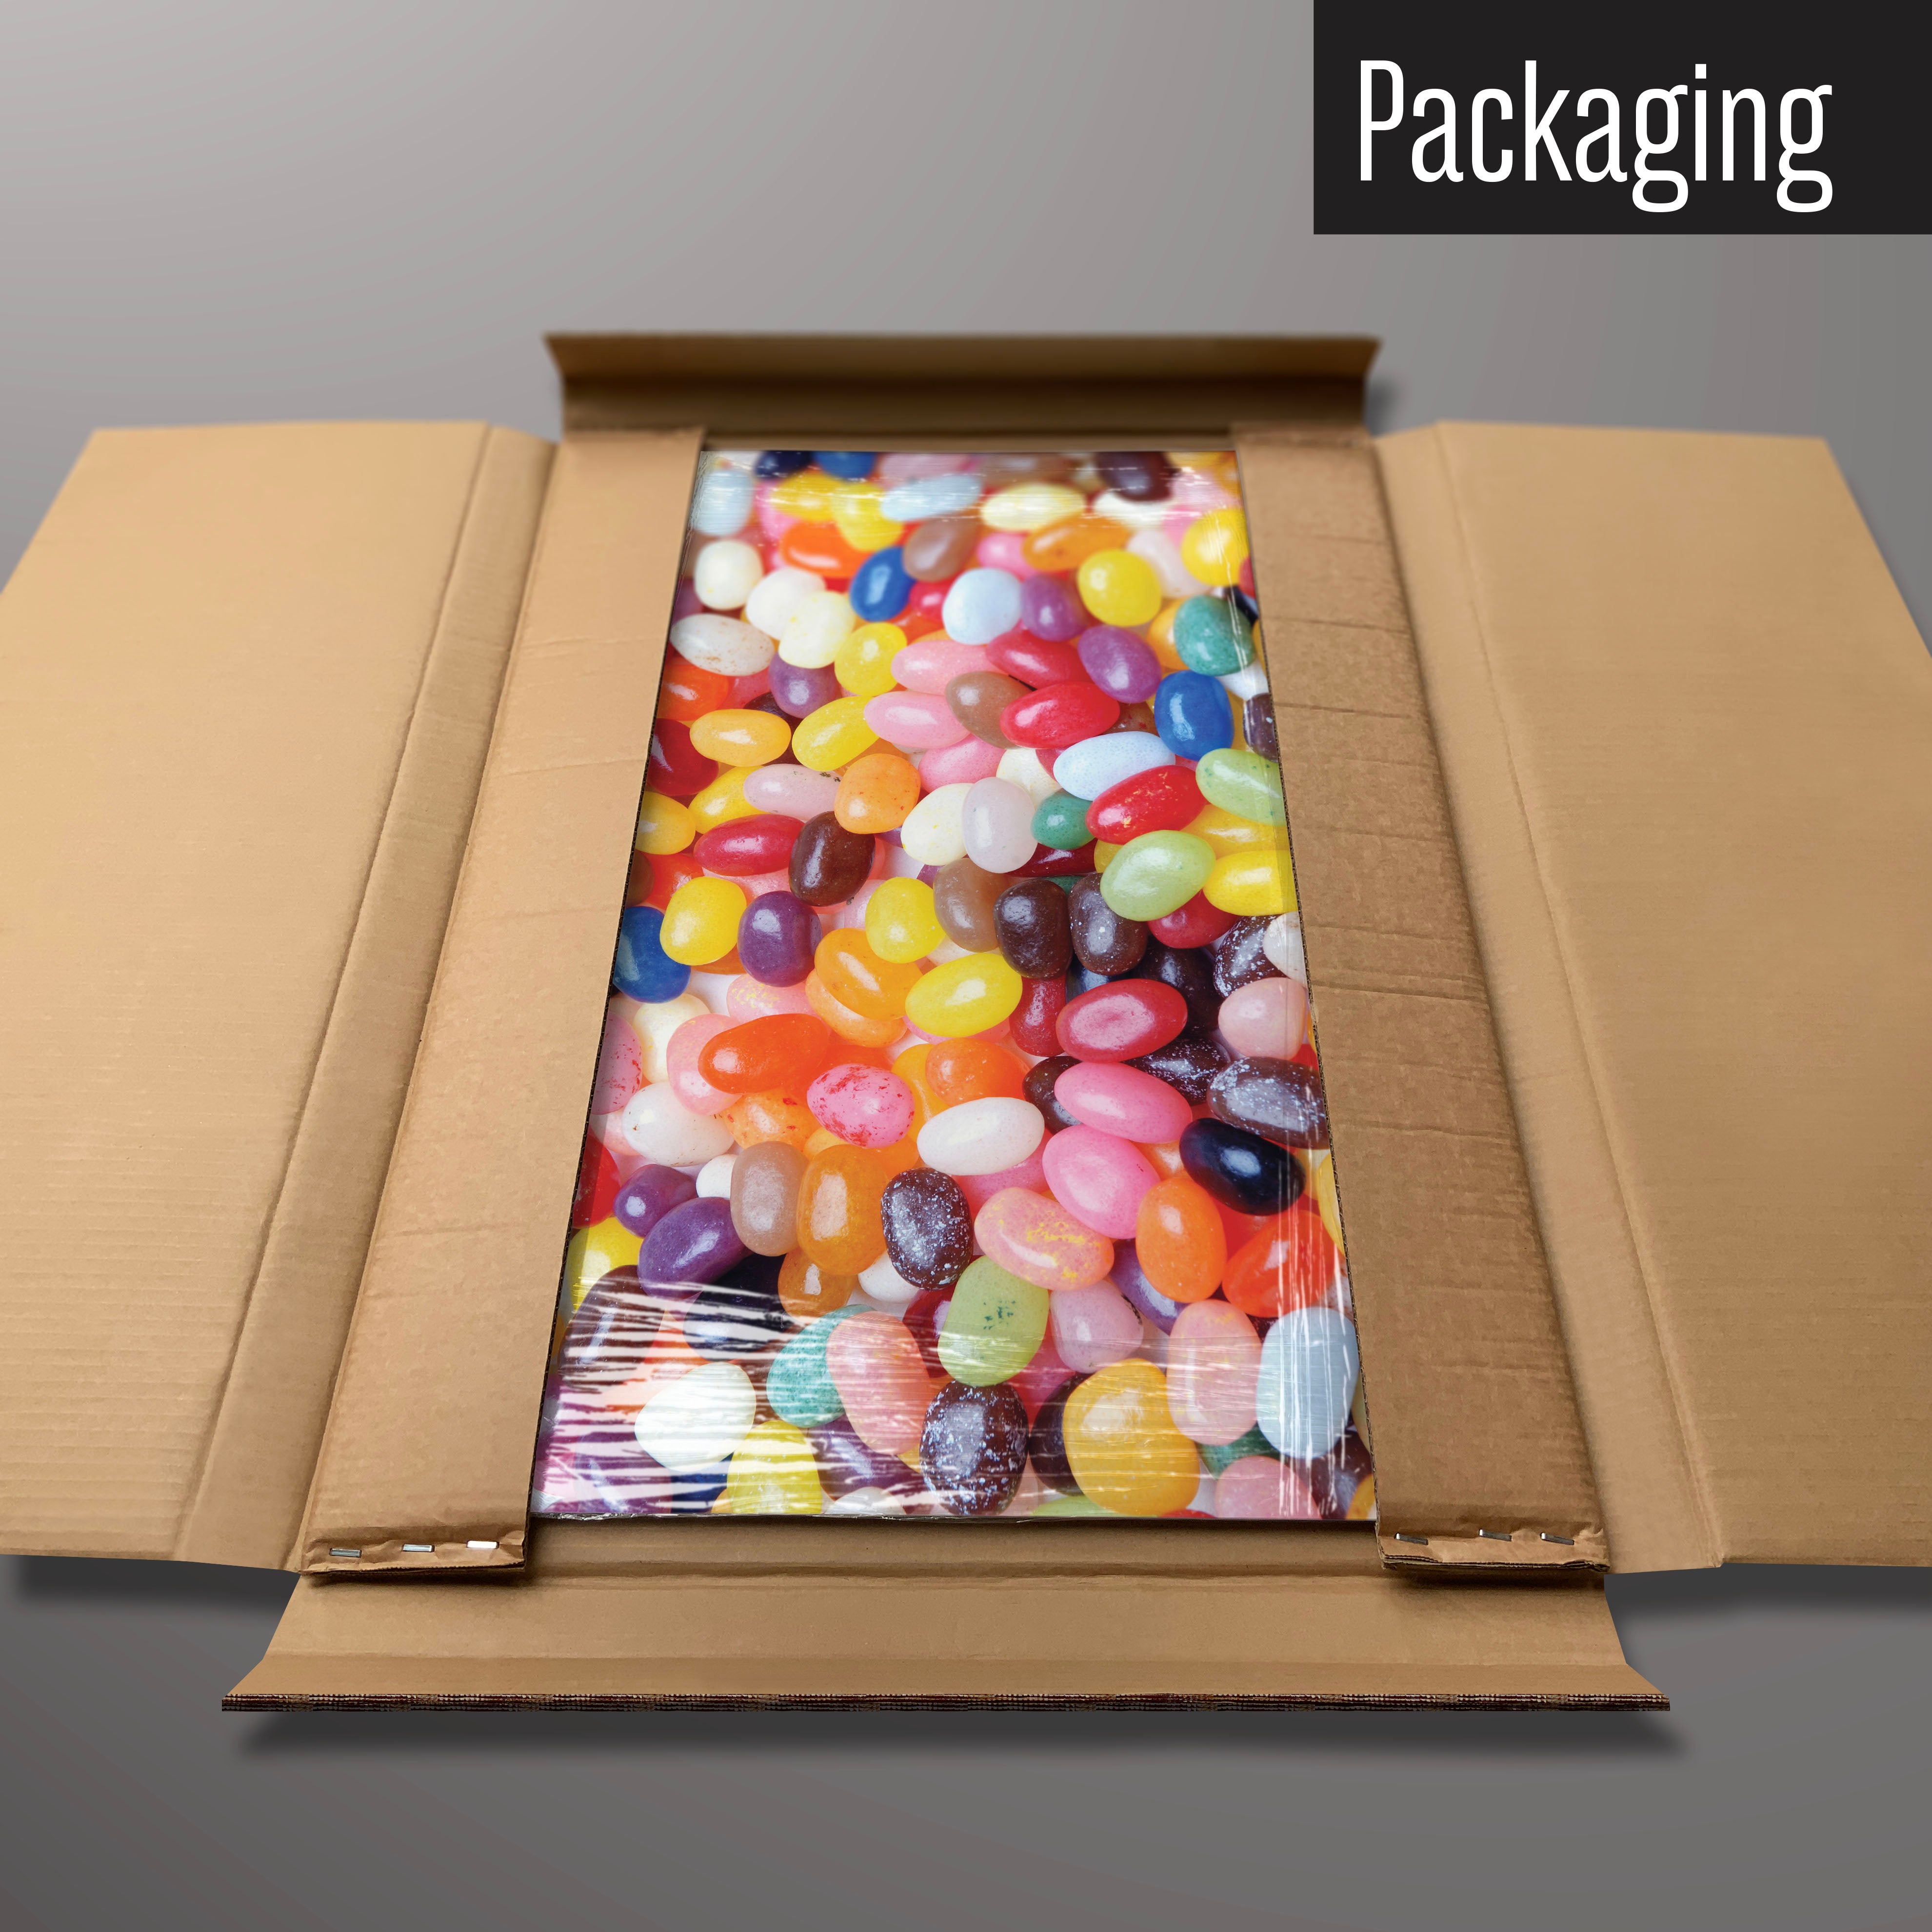 A jelly beans magnetic board in it’s cardboard packaging